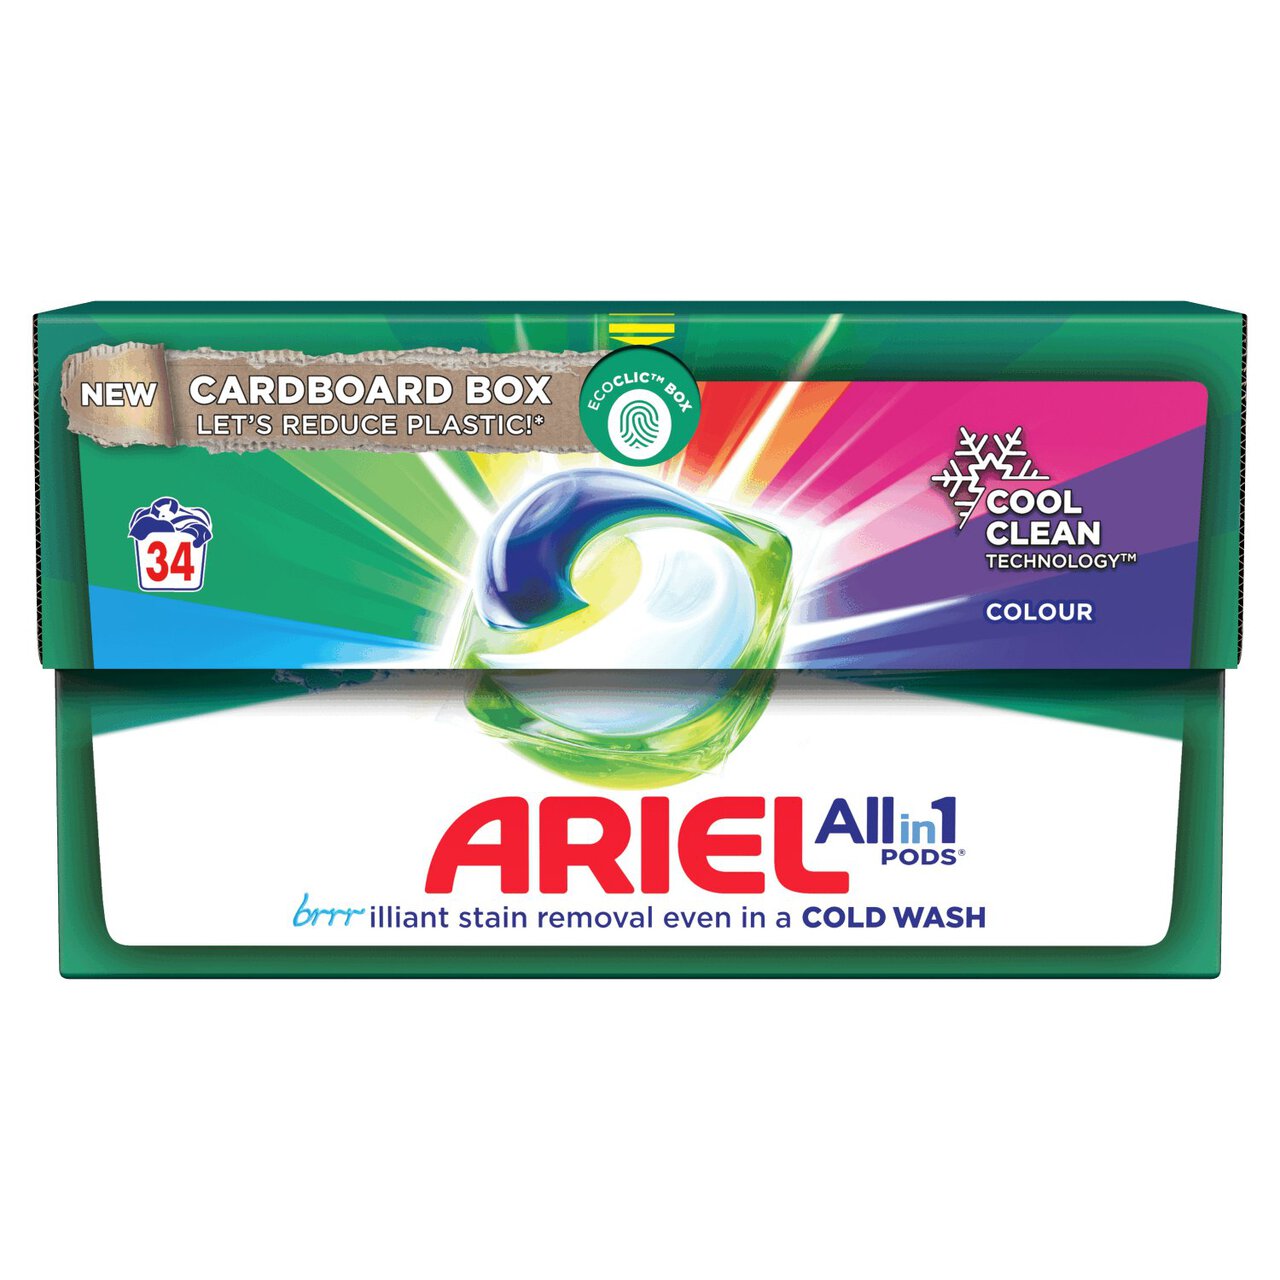 Ariel 3in1 Colour Pods Washing Capsules 34 Washes 34 per pack